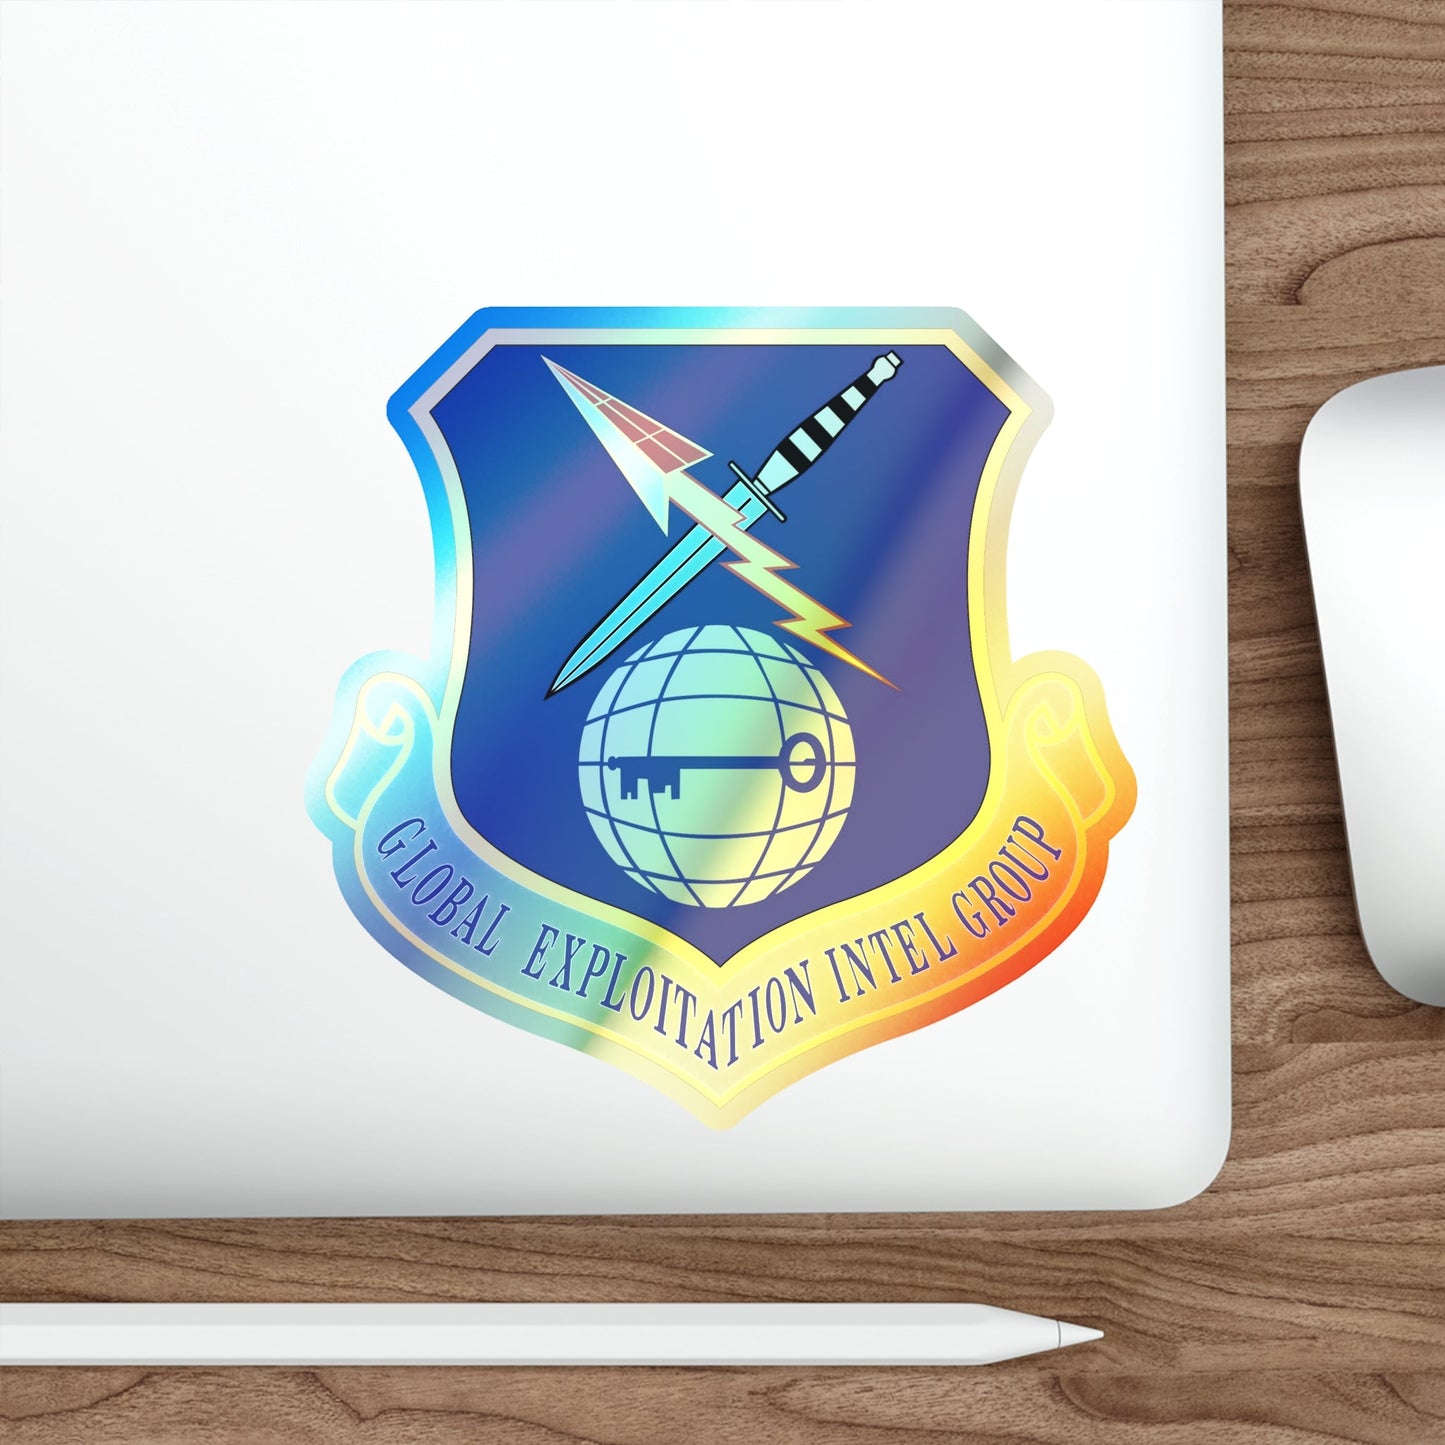 Global Exploitation Intelligence Group (U.S. Air Force) Holographic STICKER Die-Cut Vinyl Decal-The Sticker Space